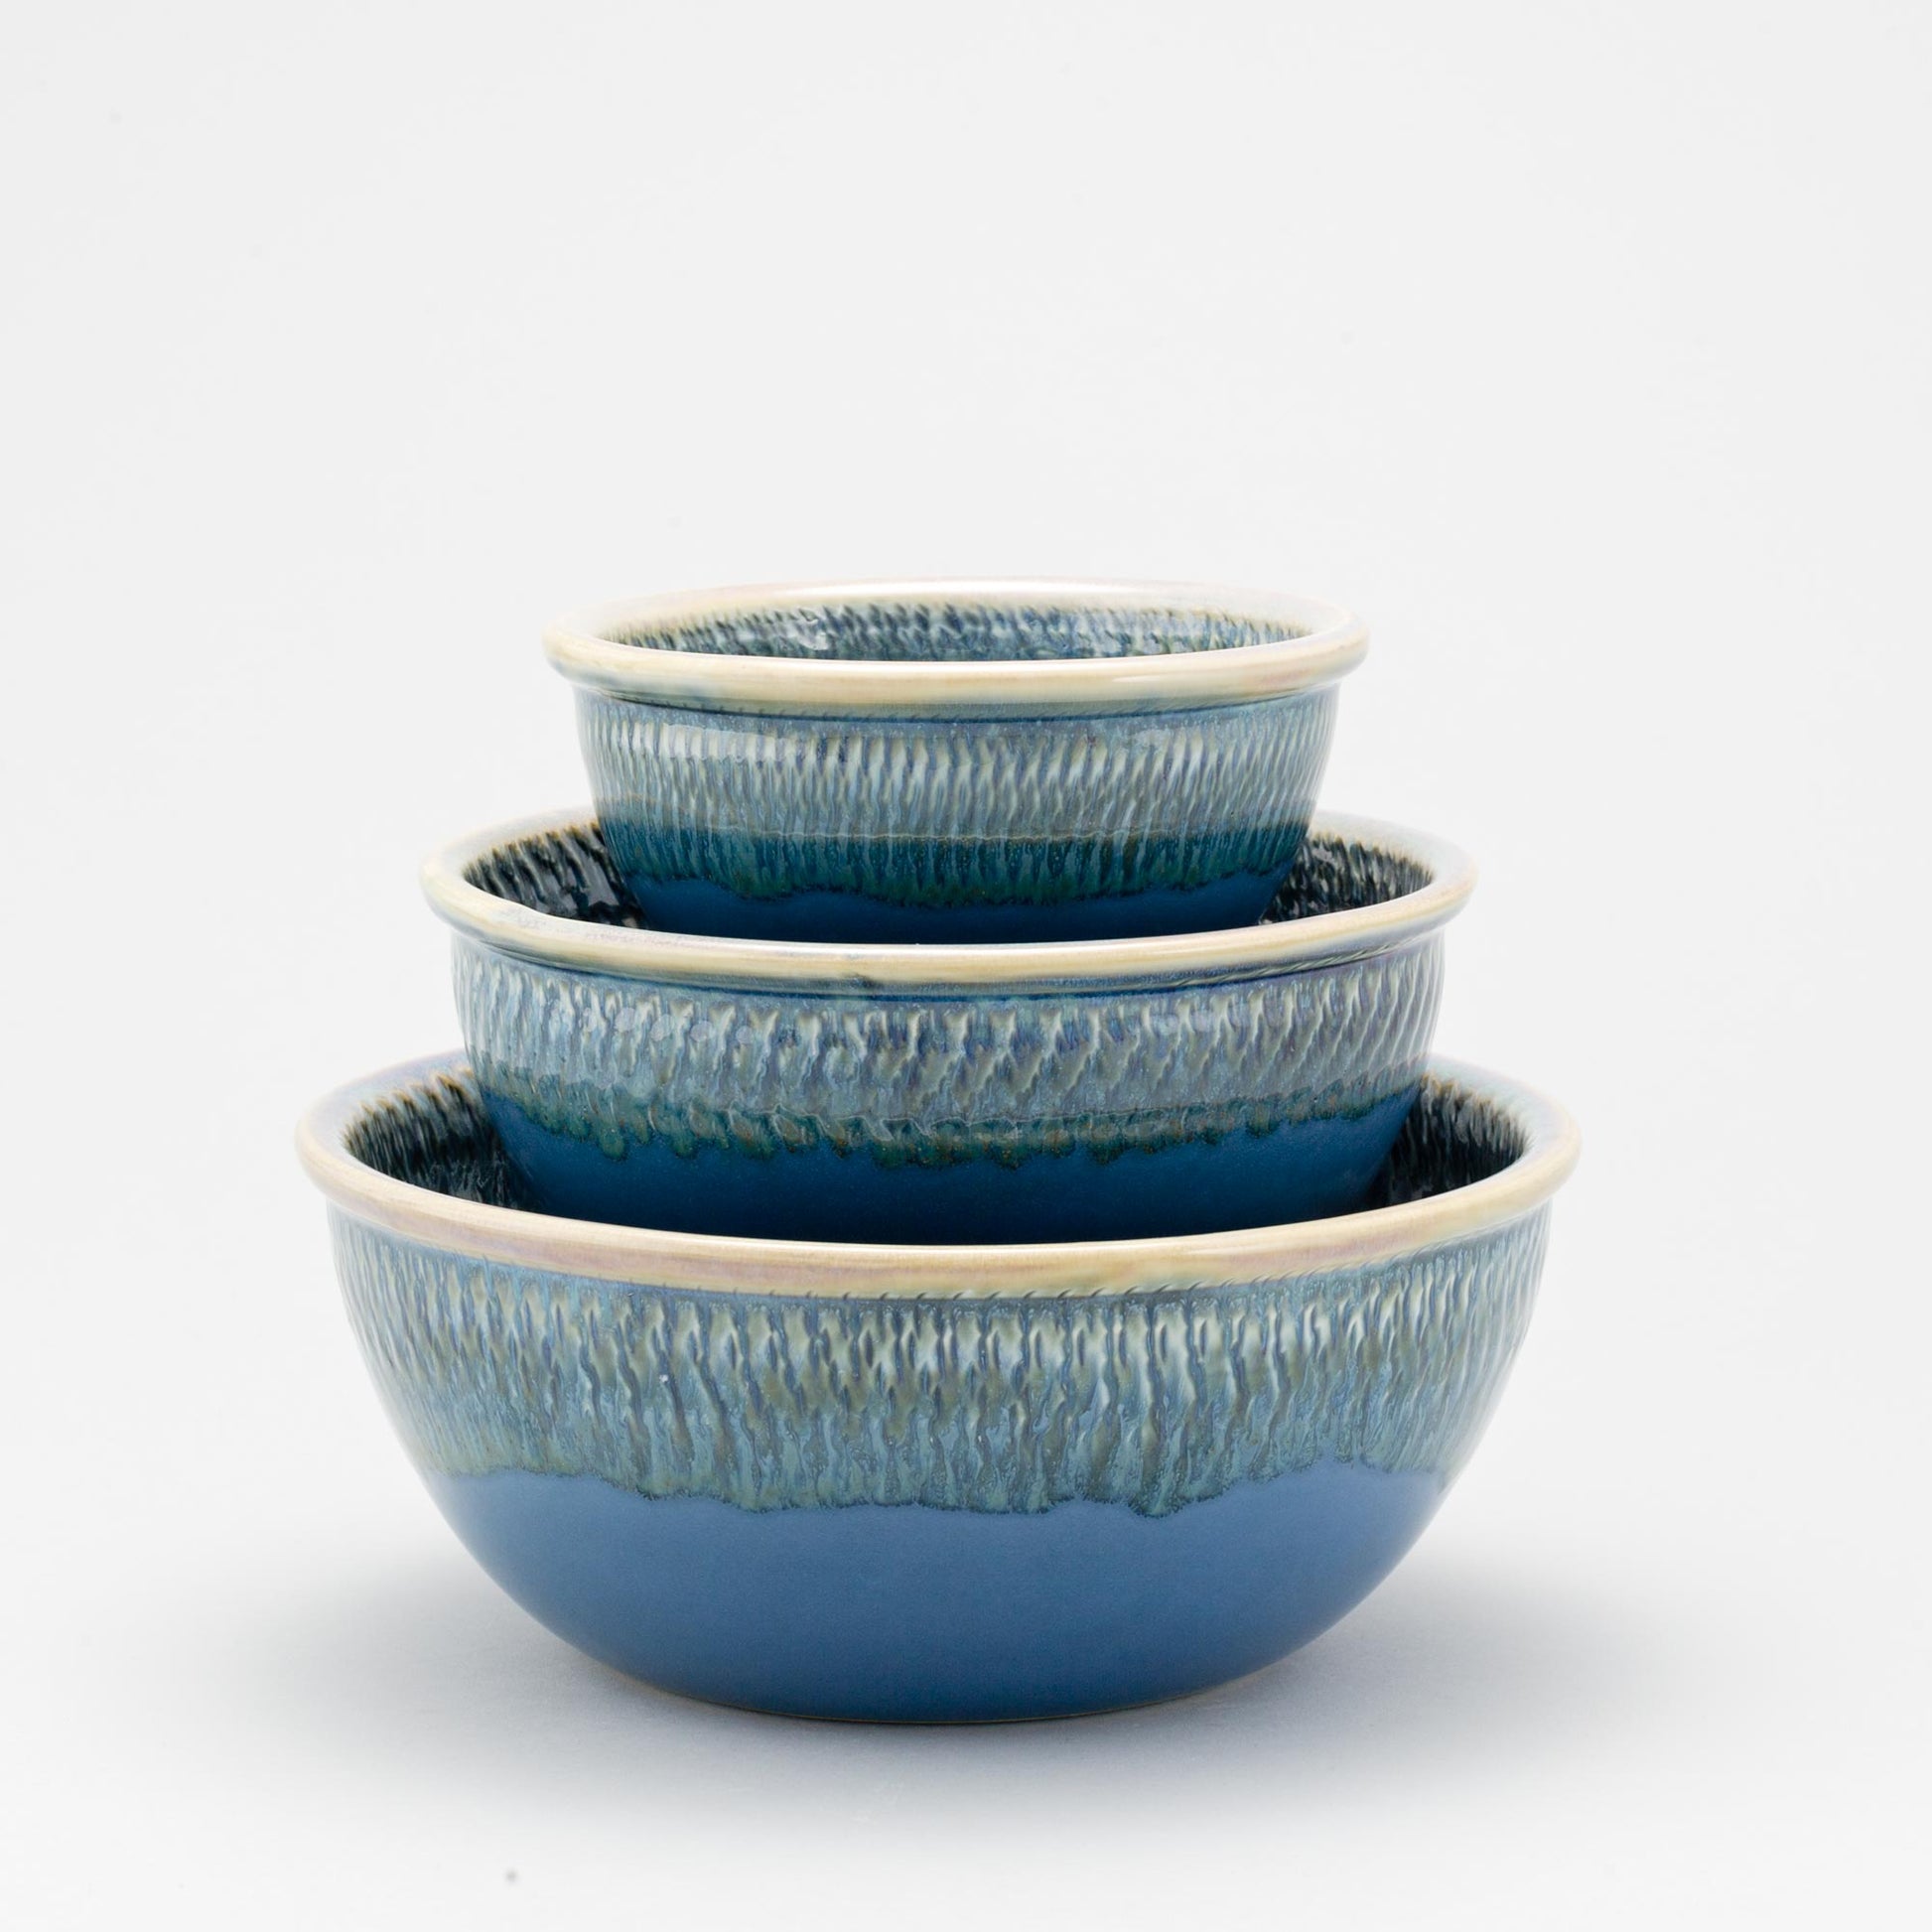 Handmade Pottery Mixing Bowl Set made by Georgetown Pottery in Maine